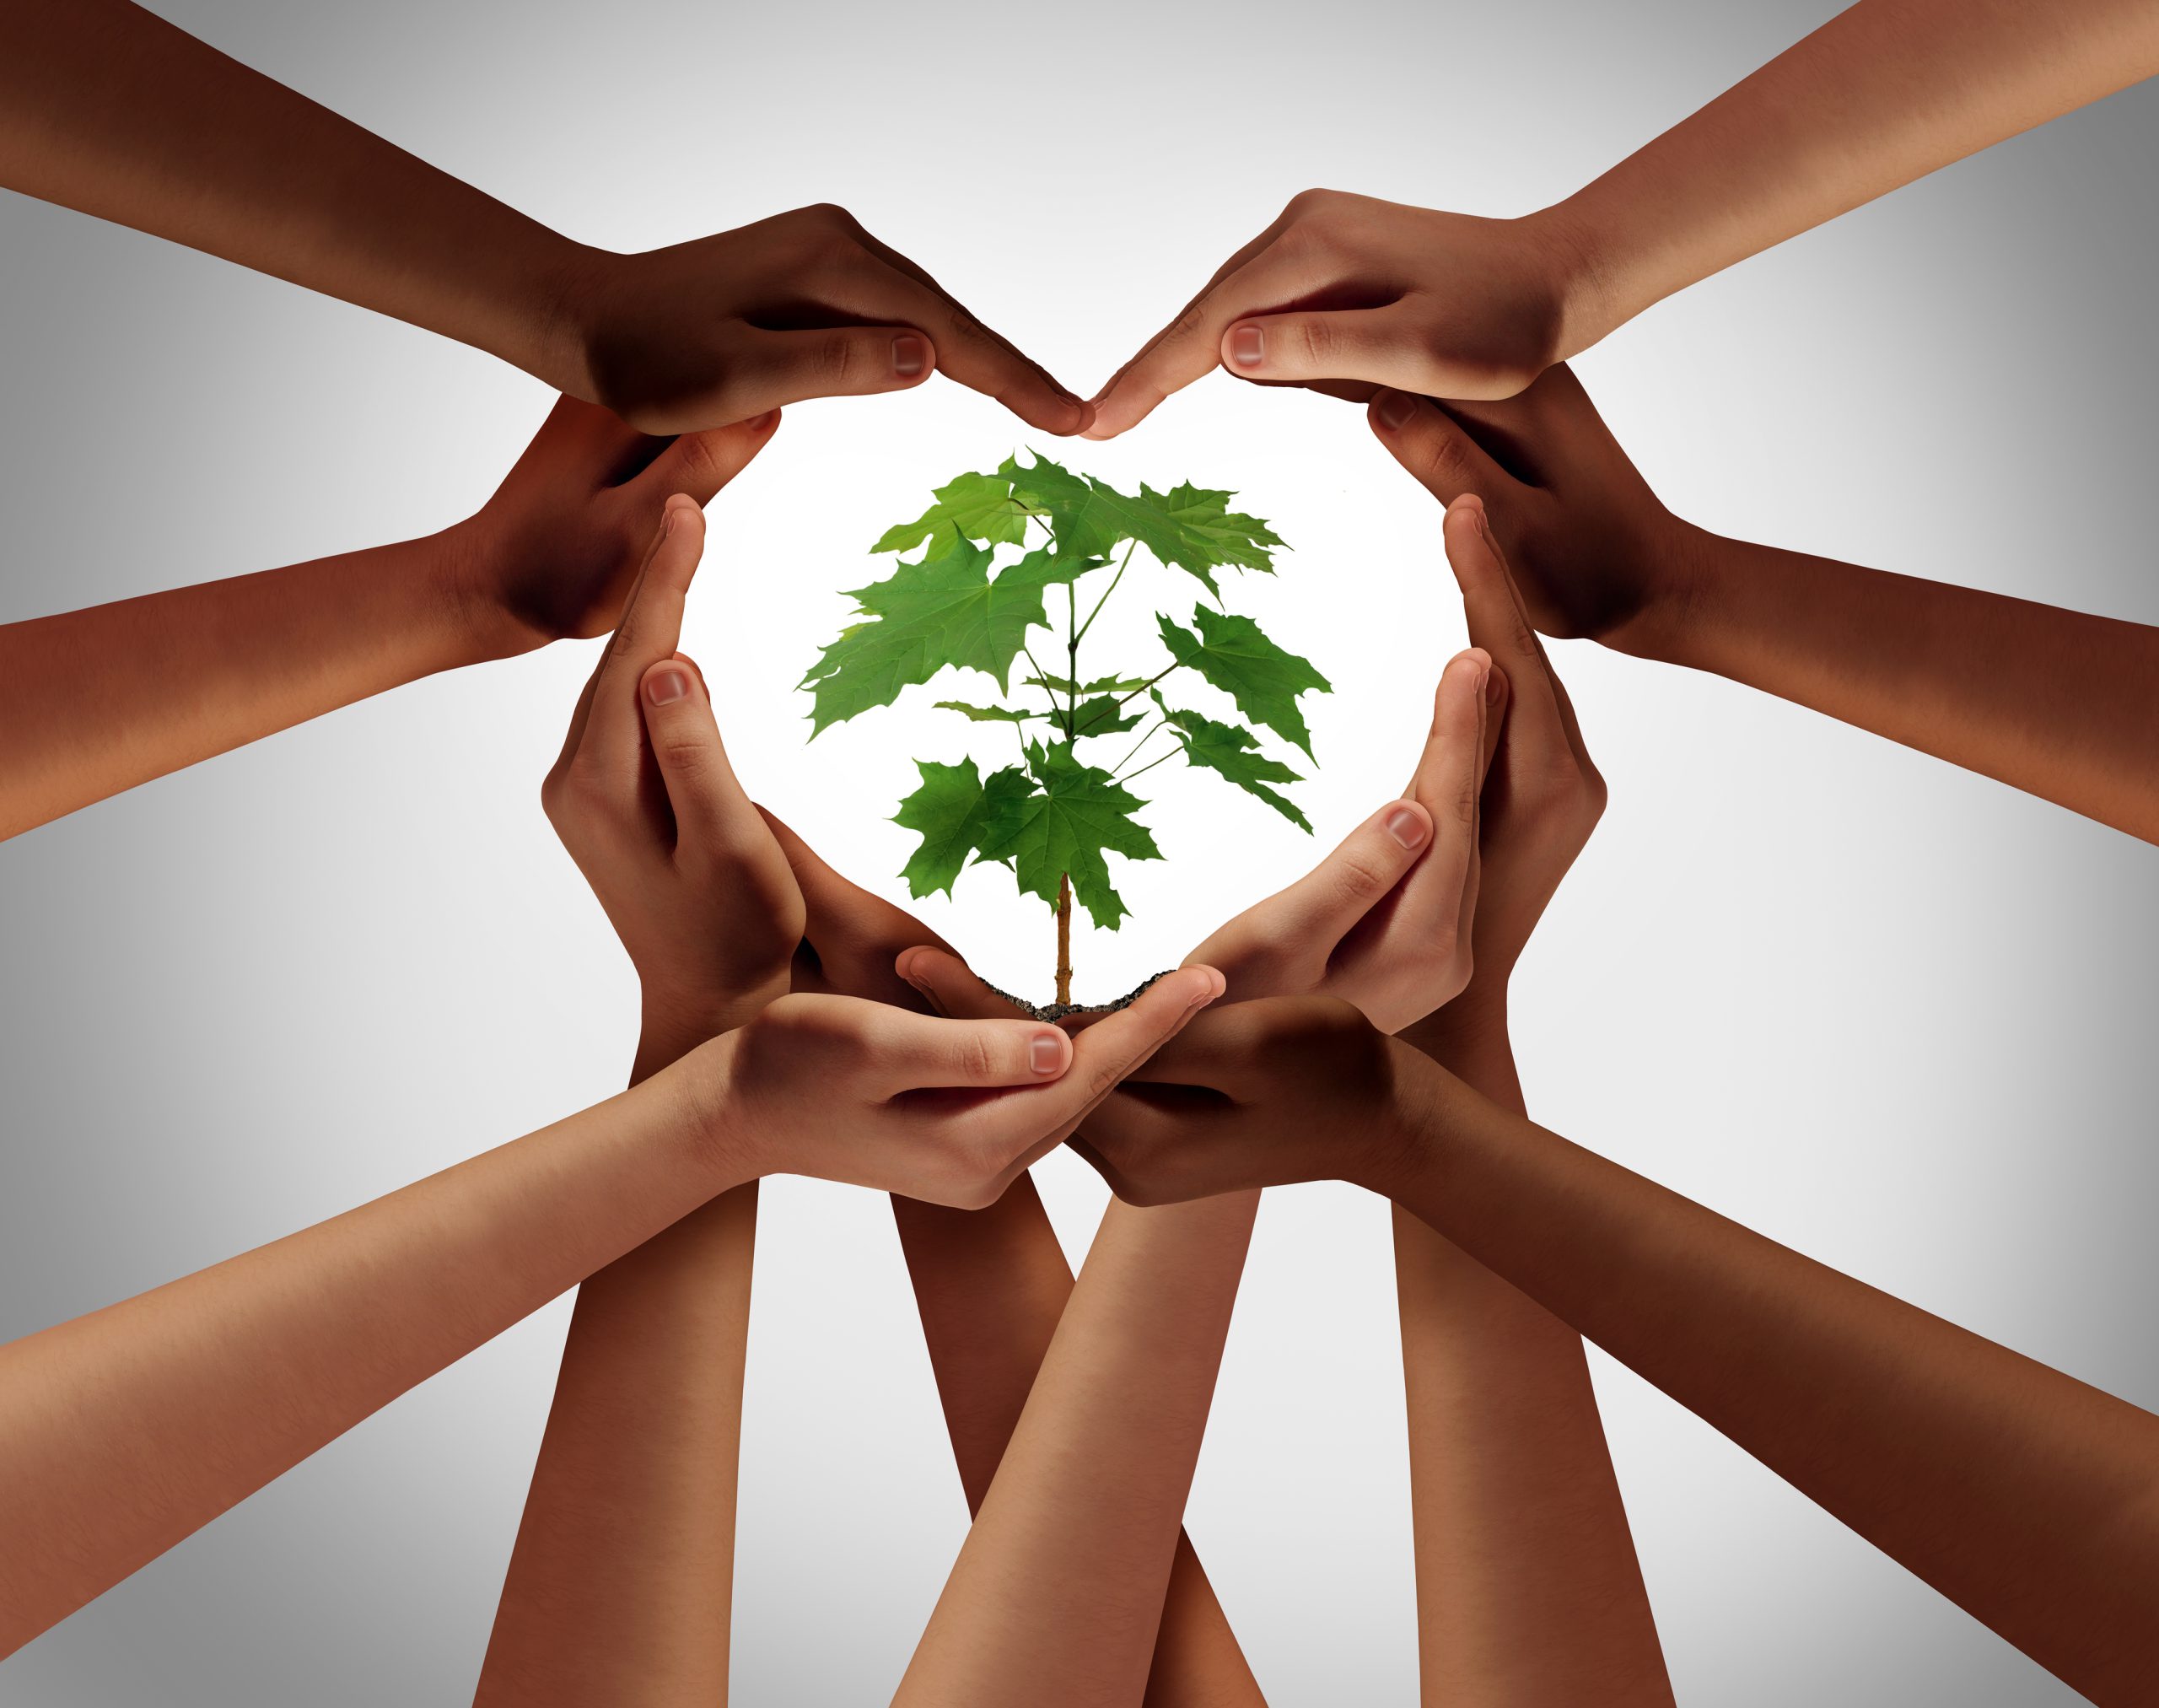 group of hands forming a heart shape around a tree sapling